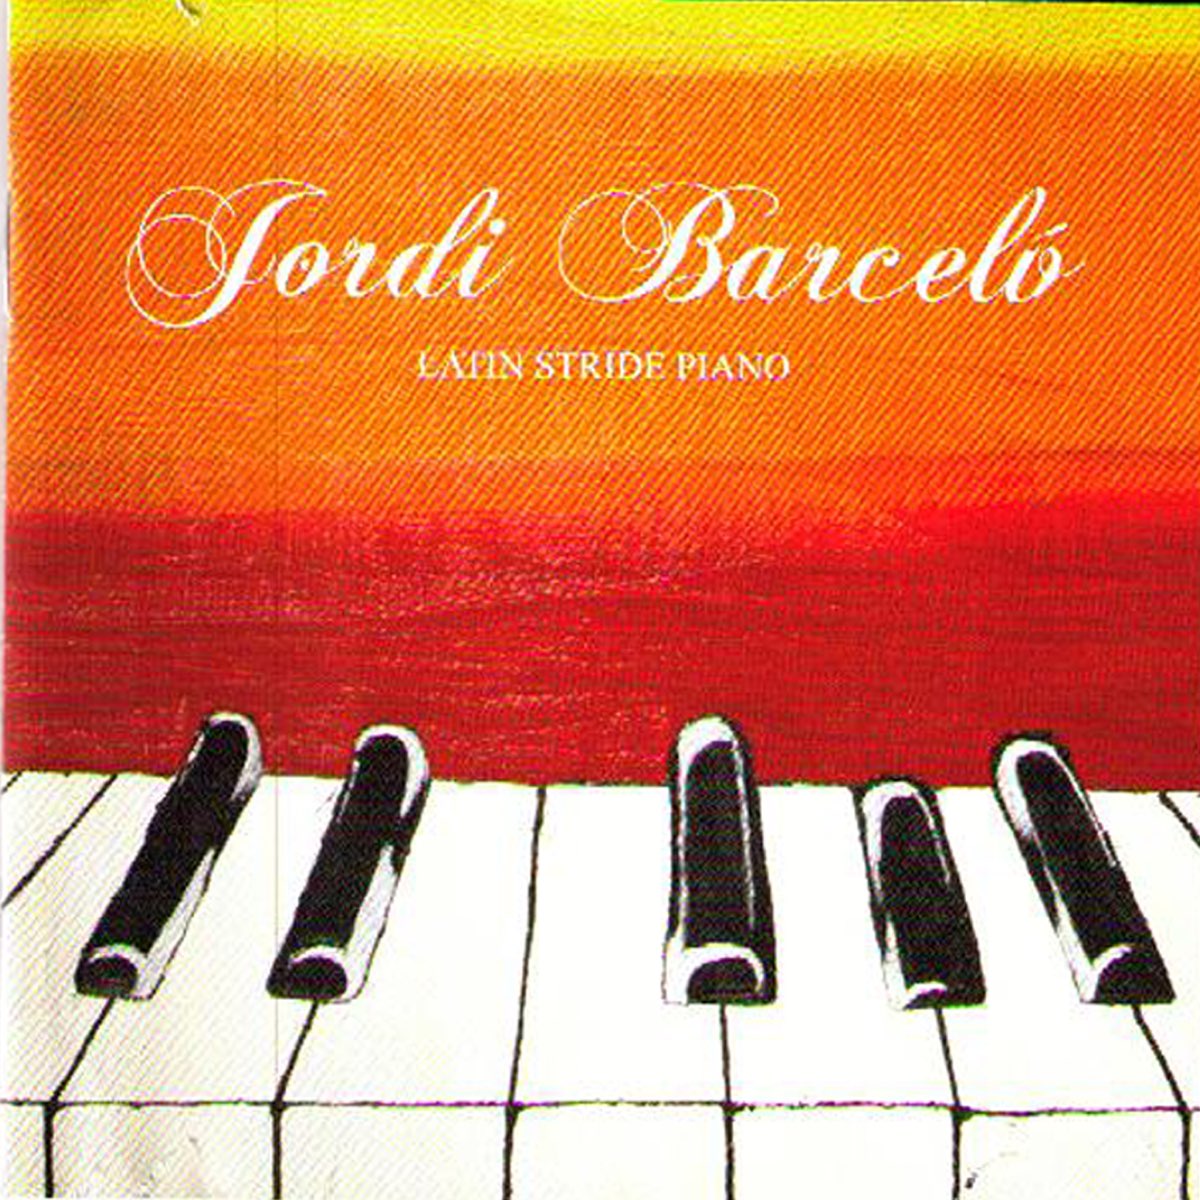 Latin Stride Piano by Jordi Barceló on Apple Music